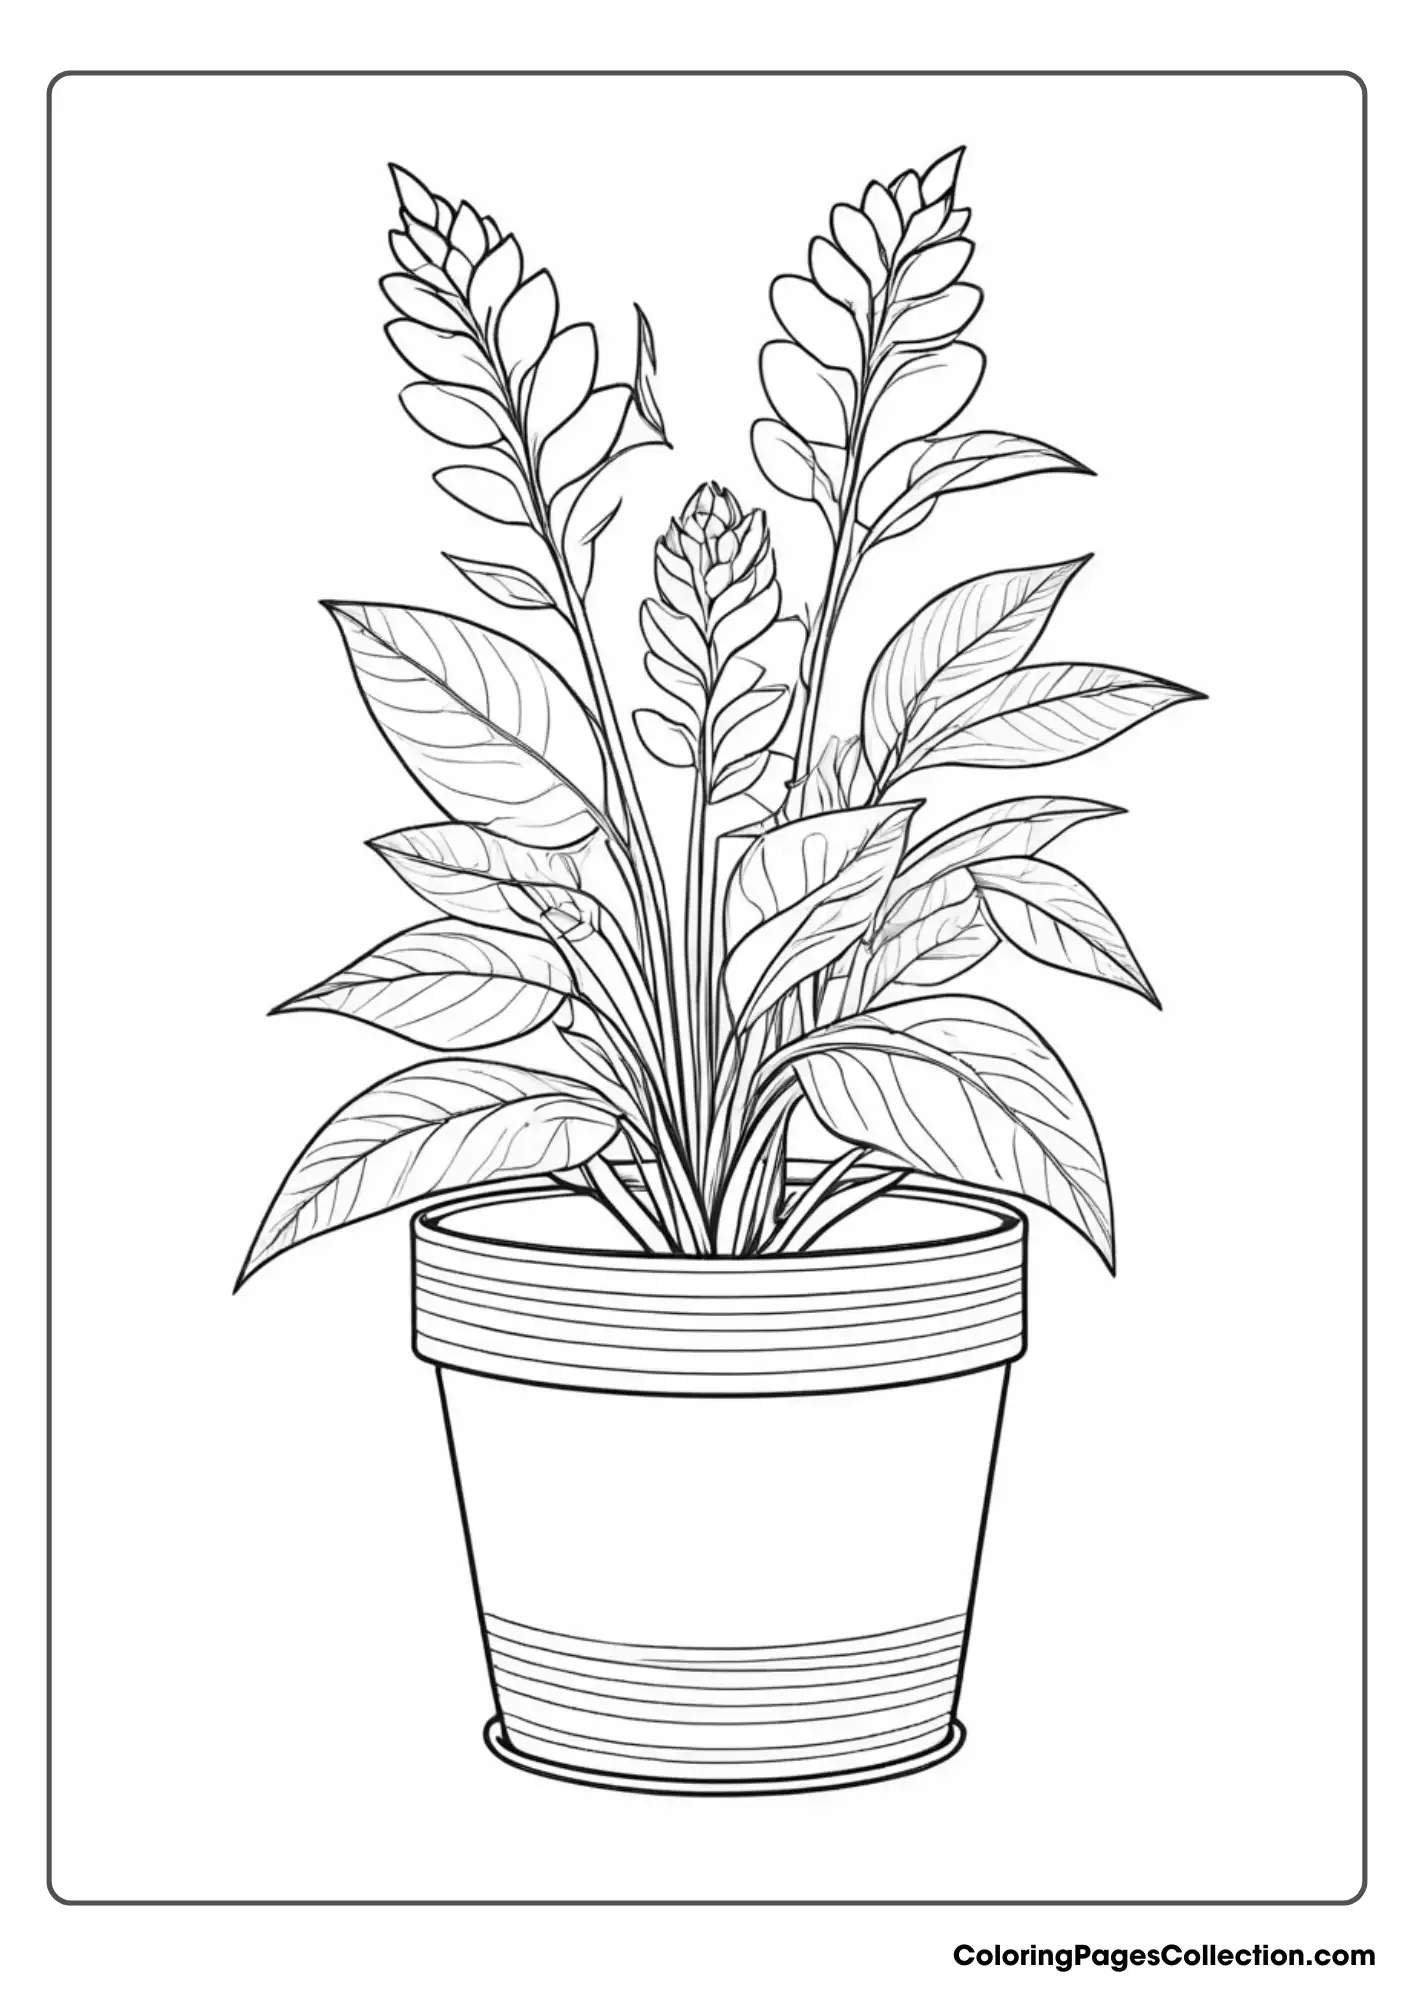 A Drawing Of A Plant In A Pot